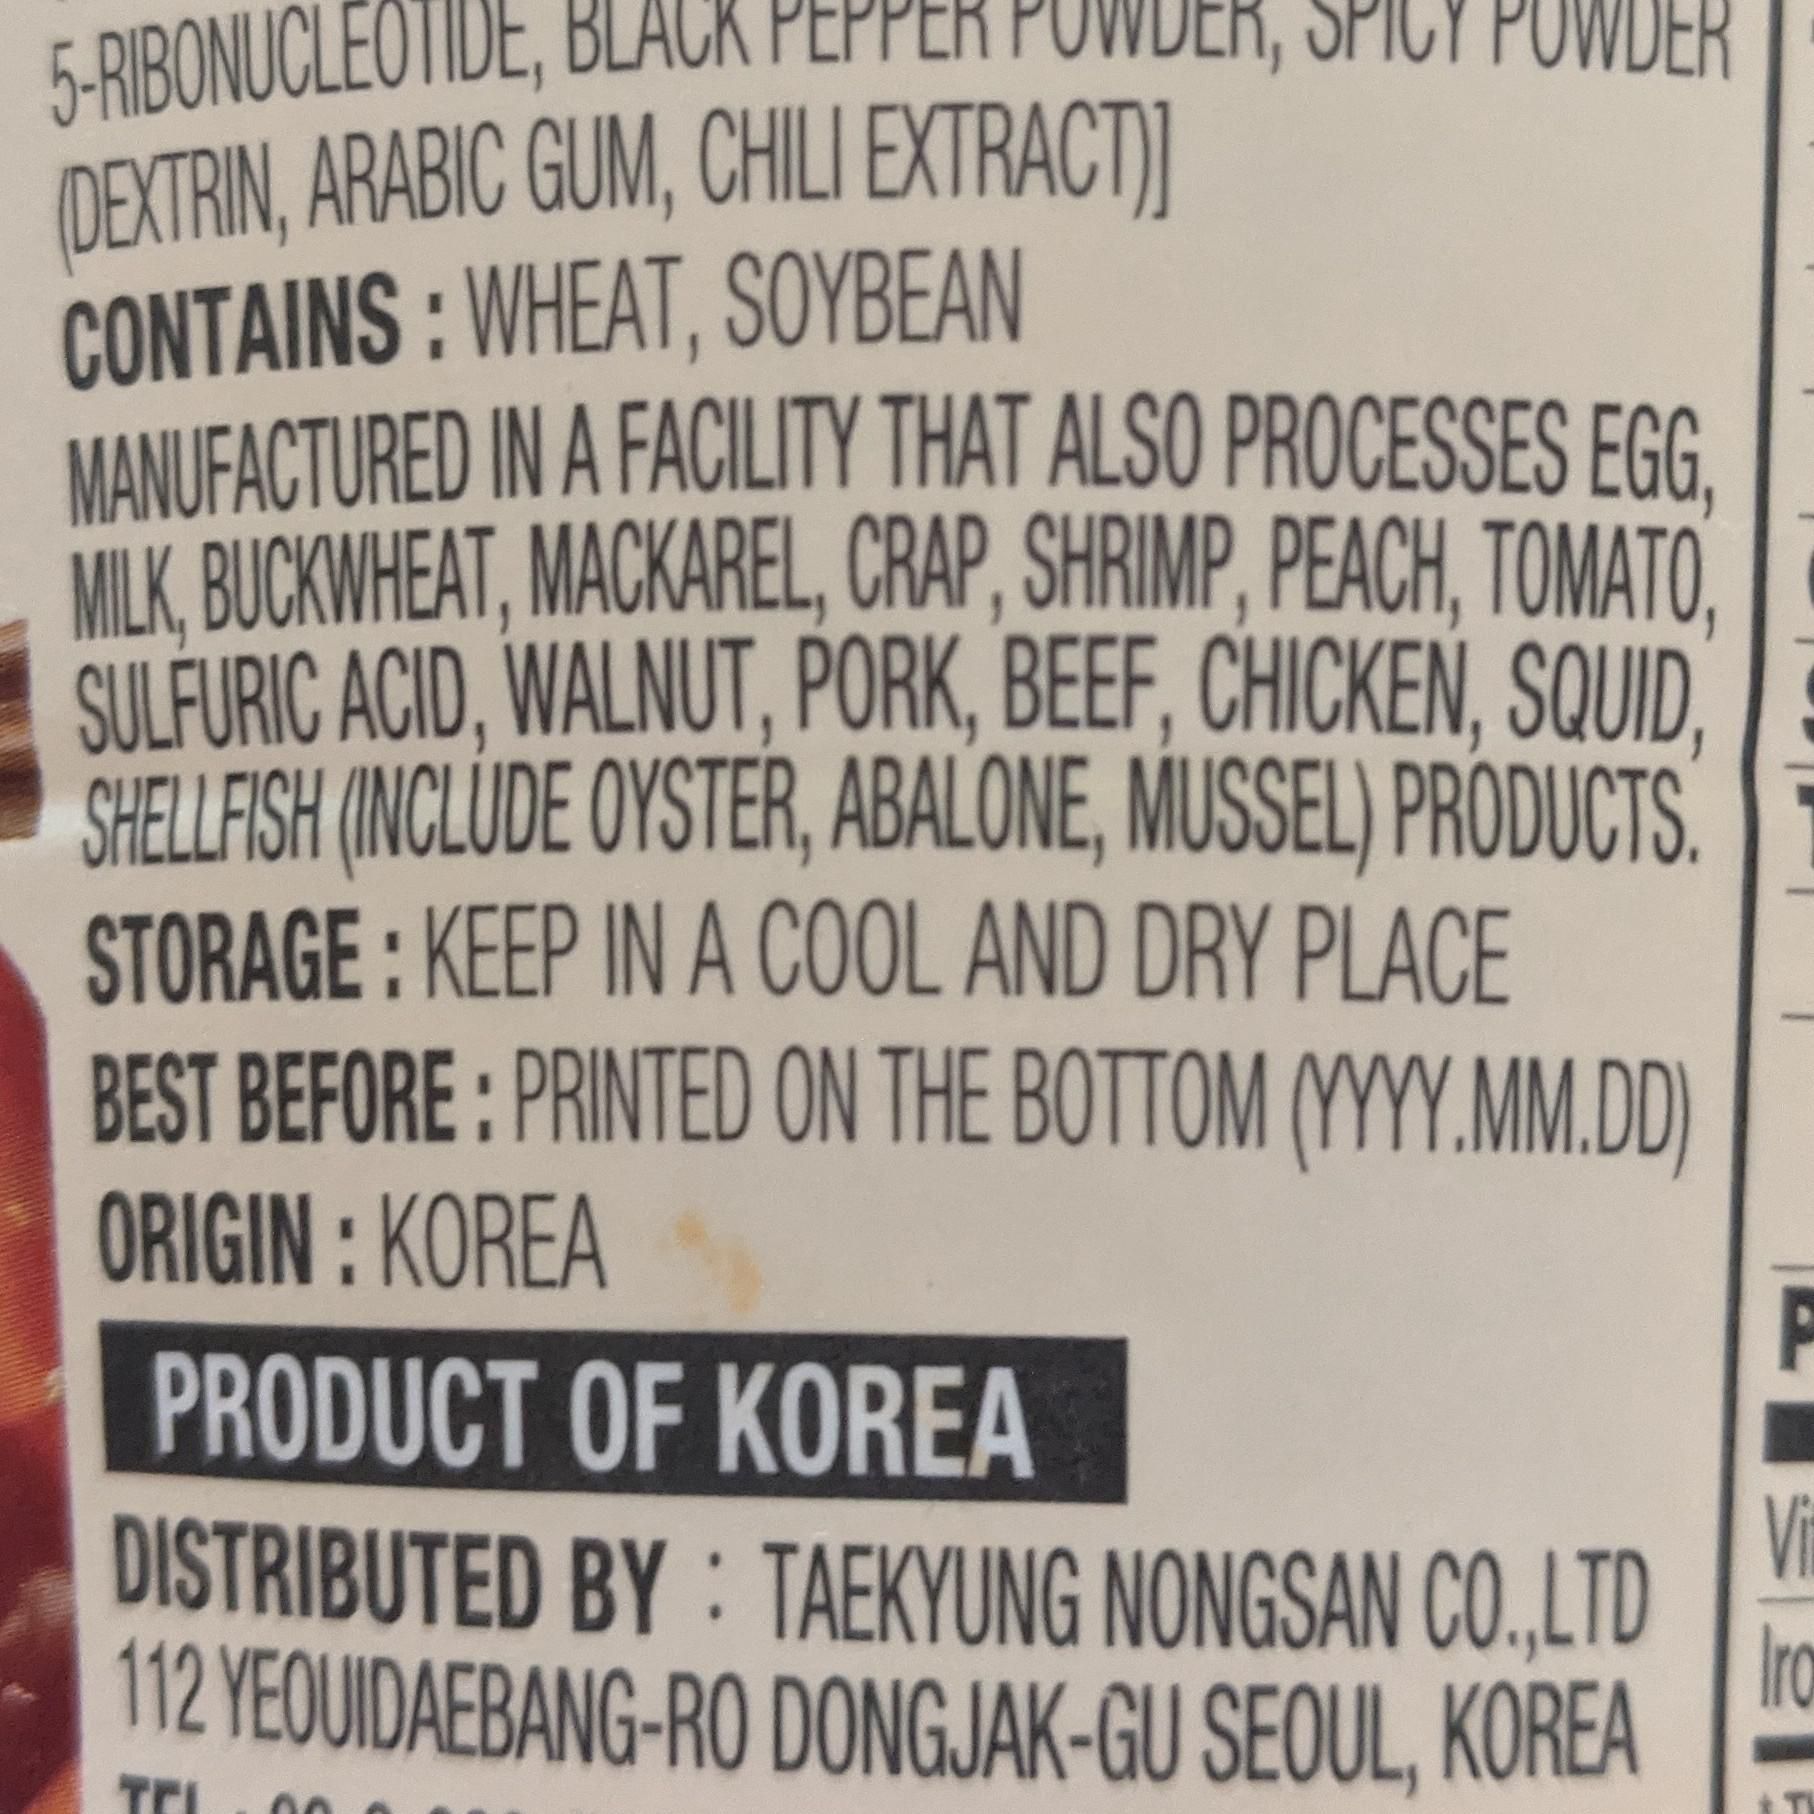 I'm sorry, manufactured in a facility that also processes what?